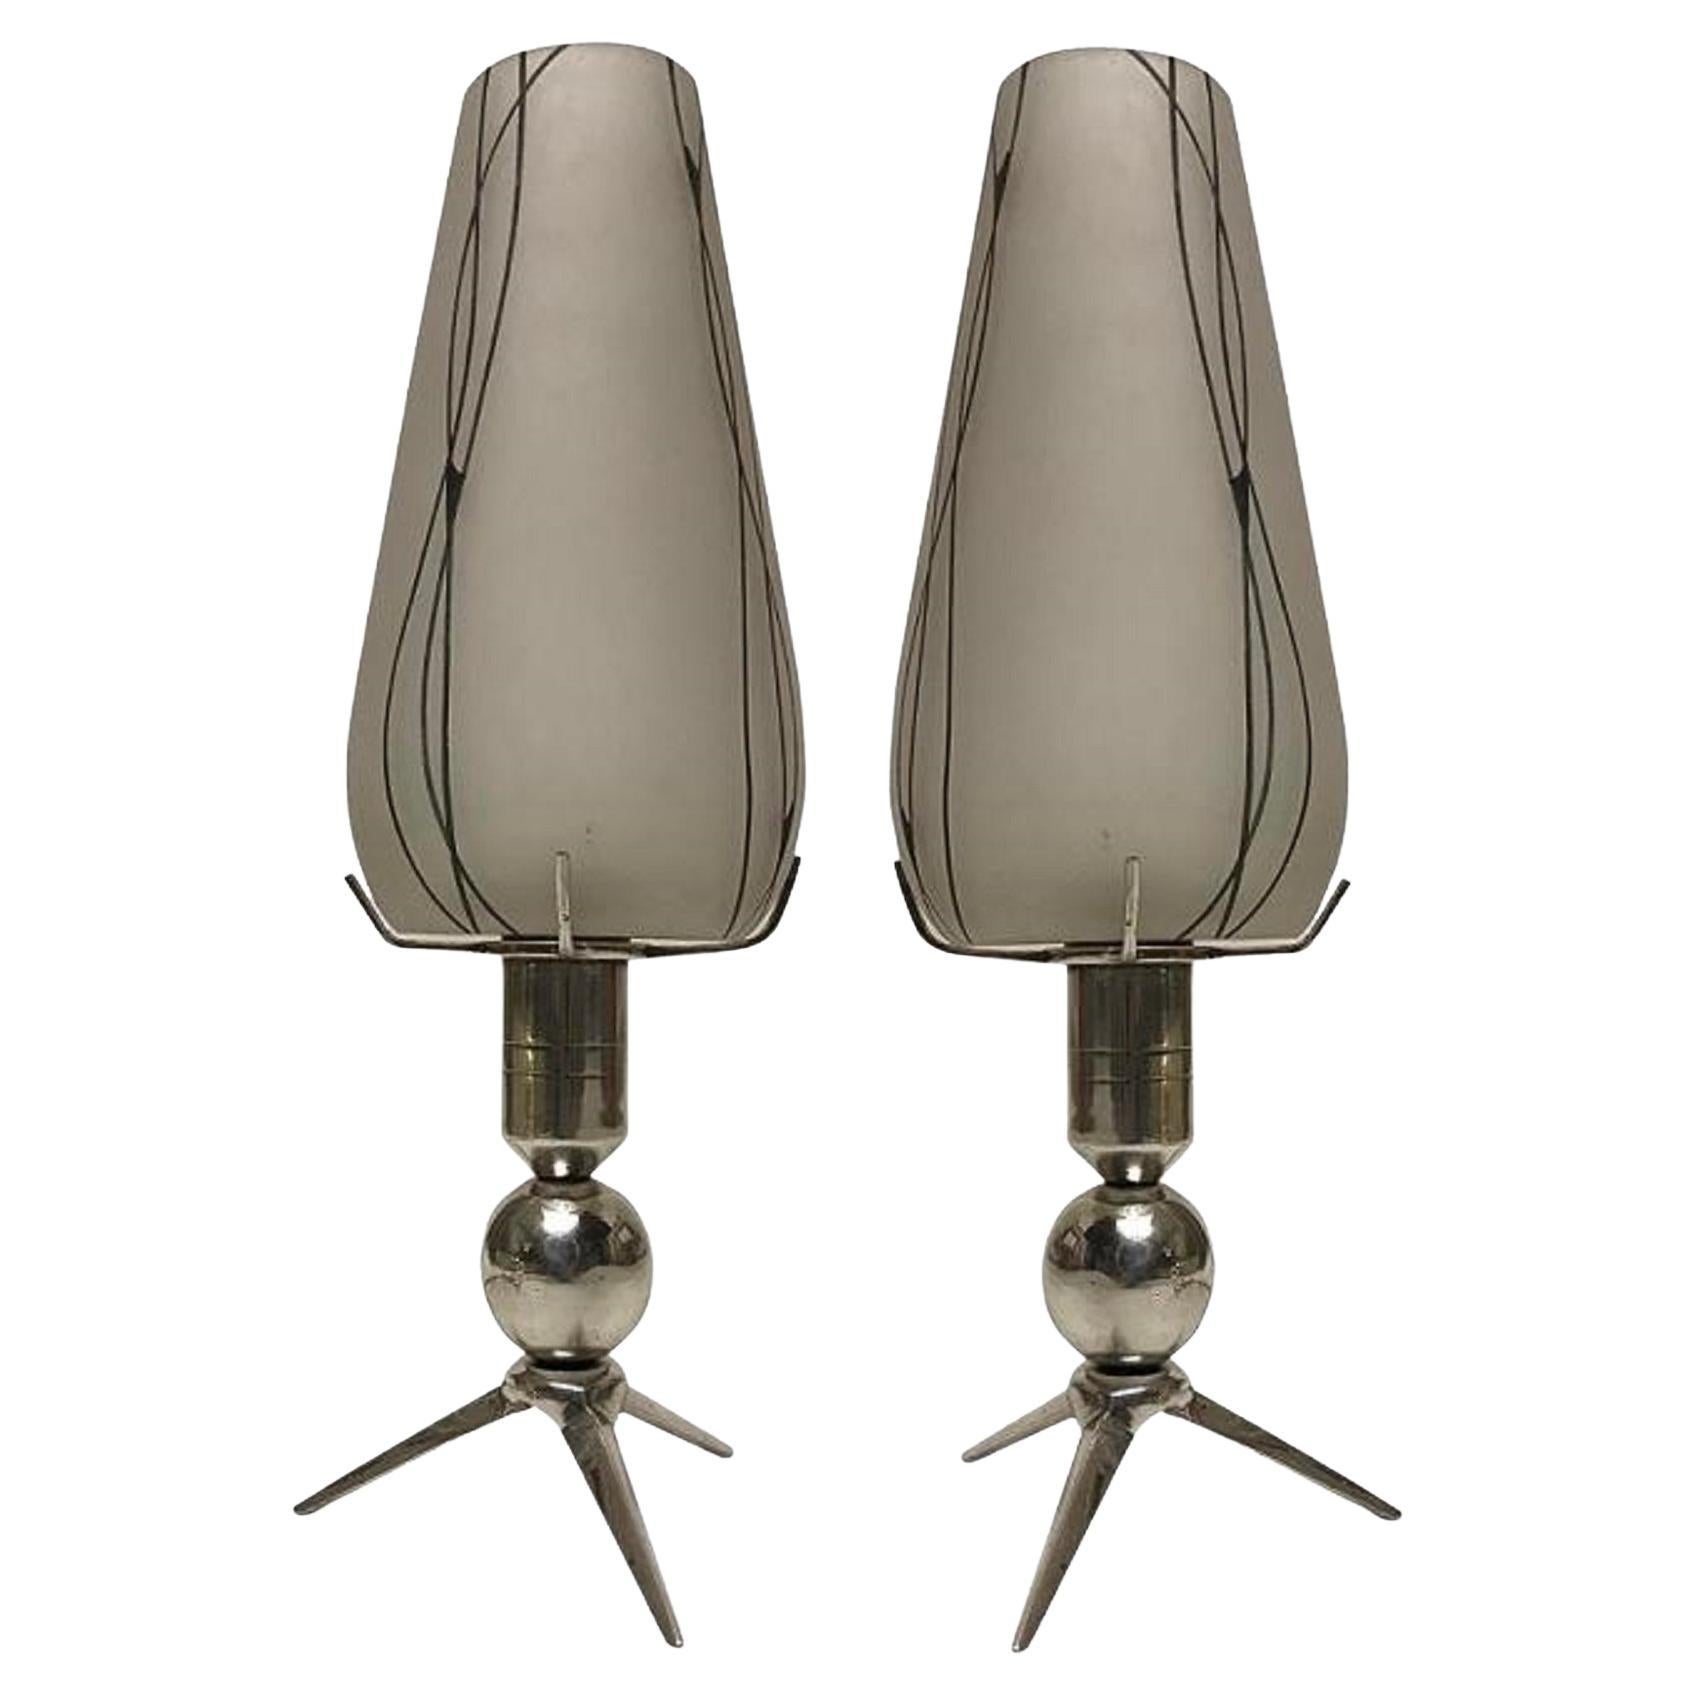 2 Table Lamps, Glass and Plated Bronze, Style: Art Deco, Italy , 1930 For Sale